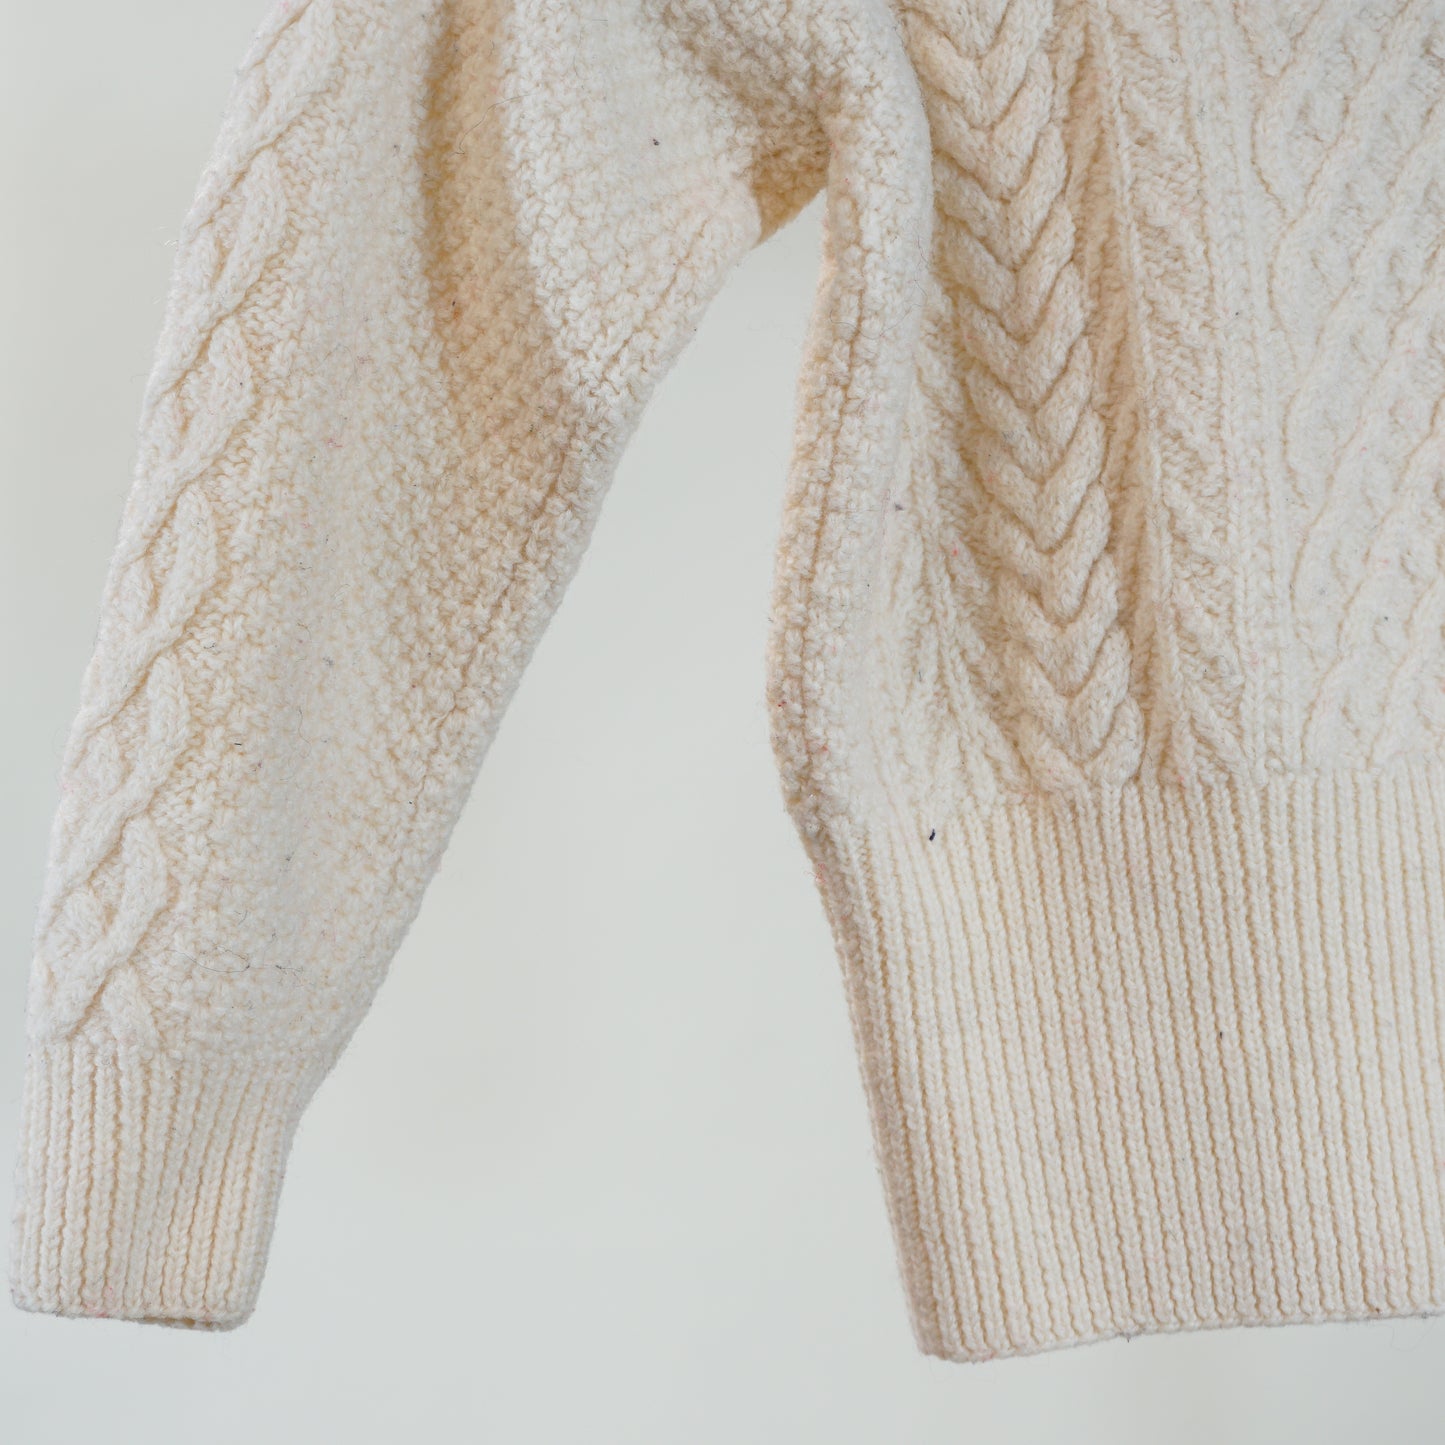 2010s 'Second Hand Material' Knit Sweater (S)